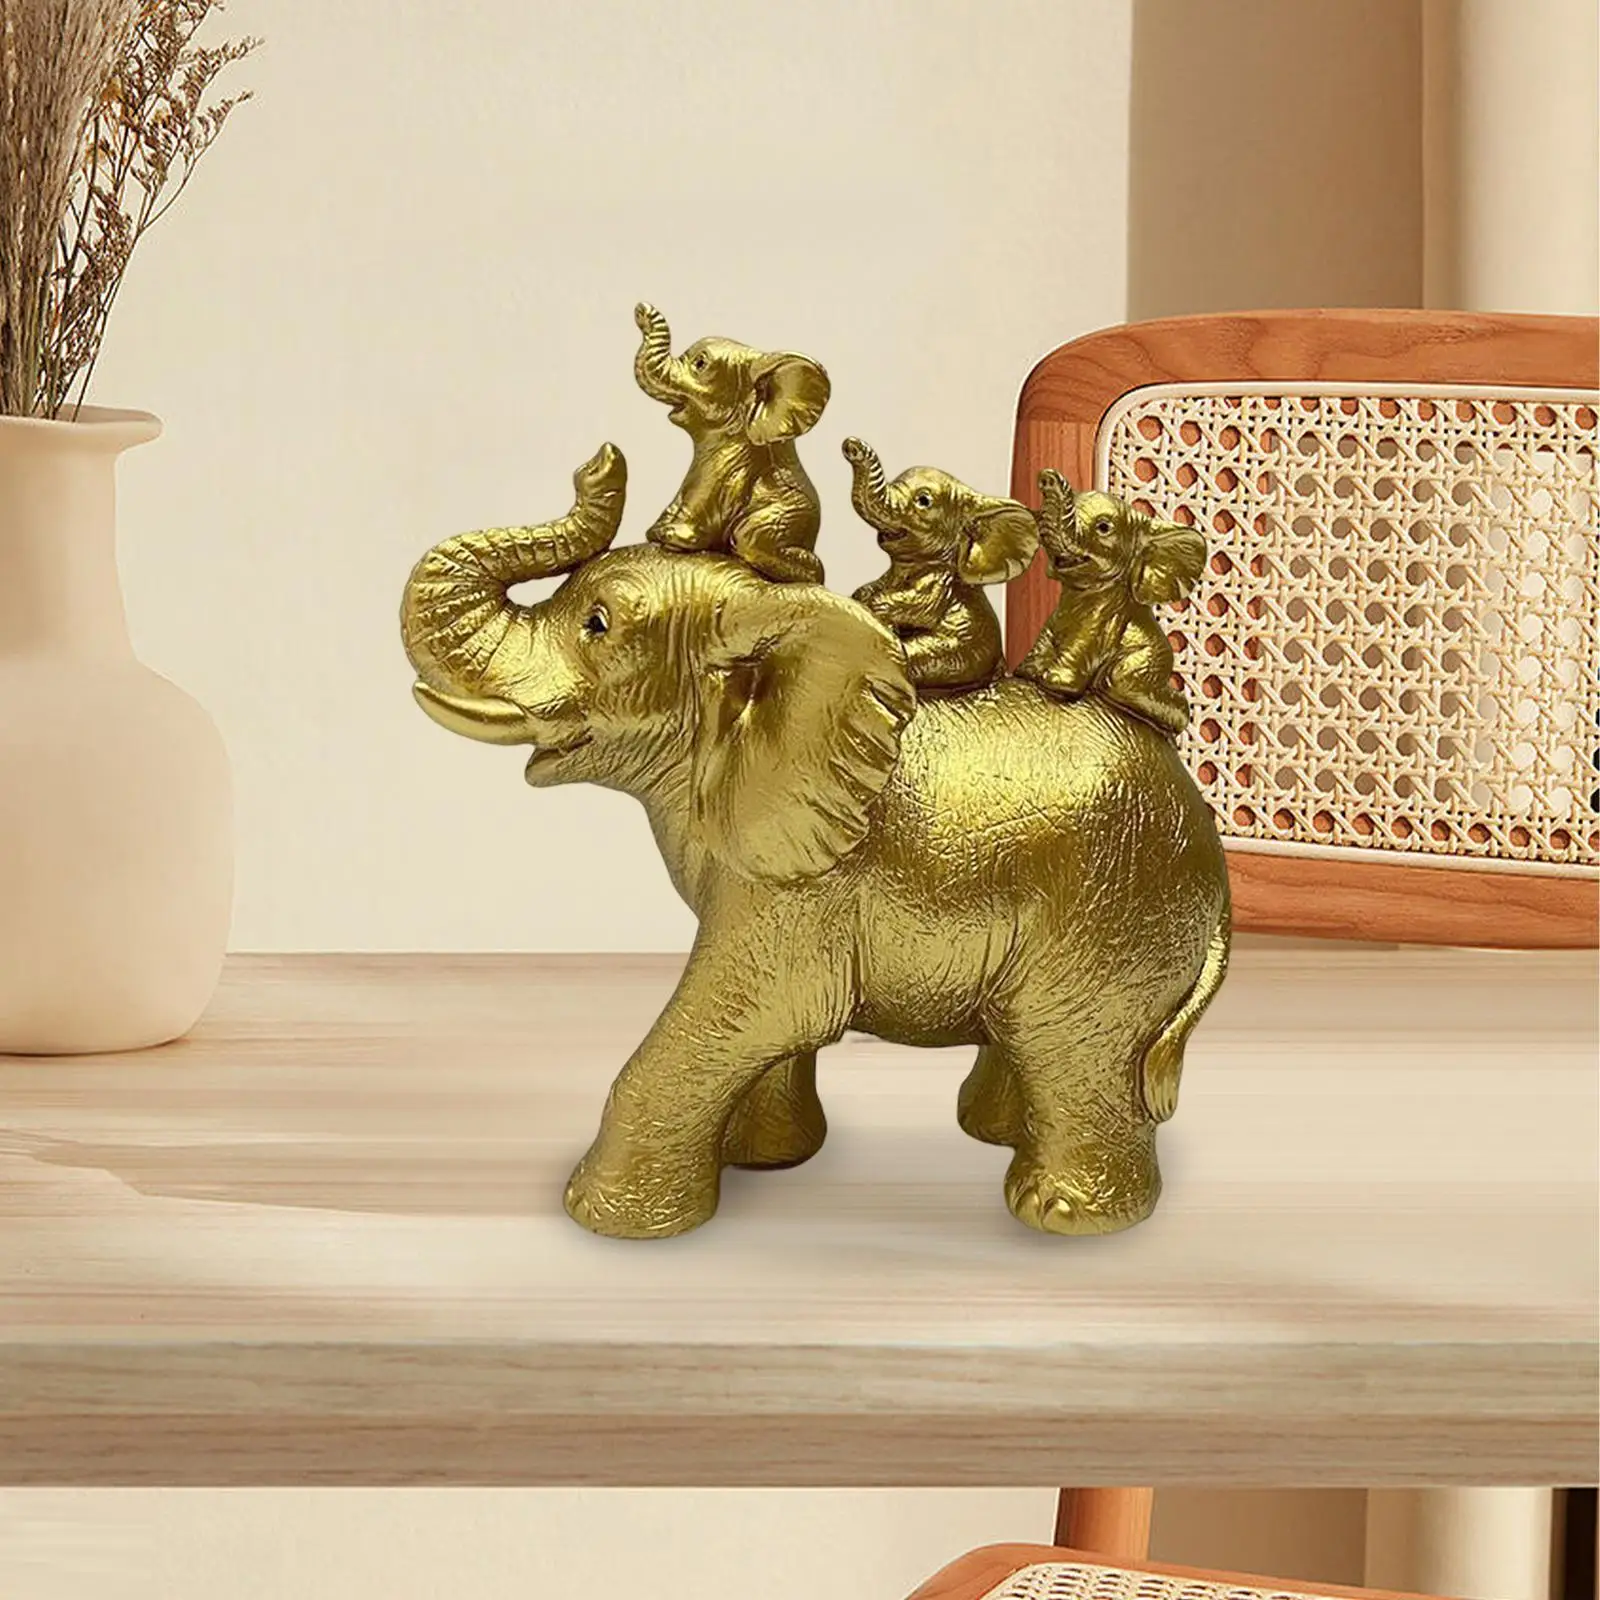 3 Baby Elephants Riding AN Elephant Statues Animals Sculptures Decors Tabletop Desk Resin Figurines for Holidays Festivals Home